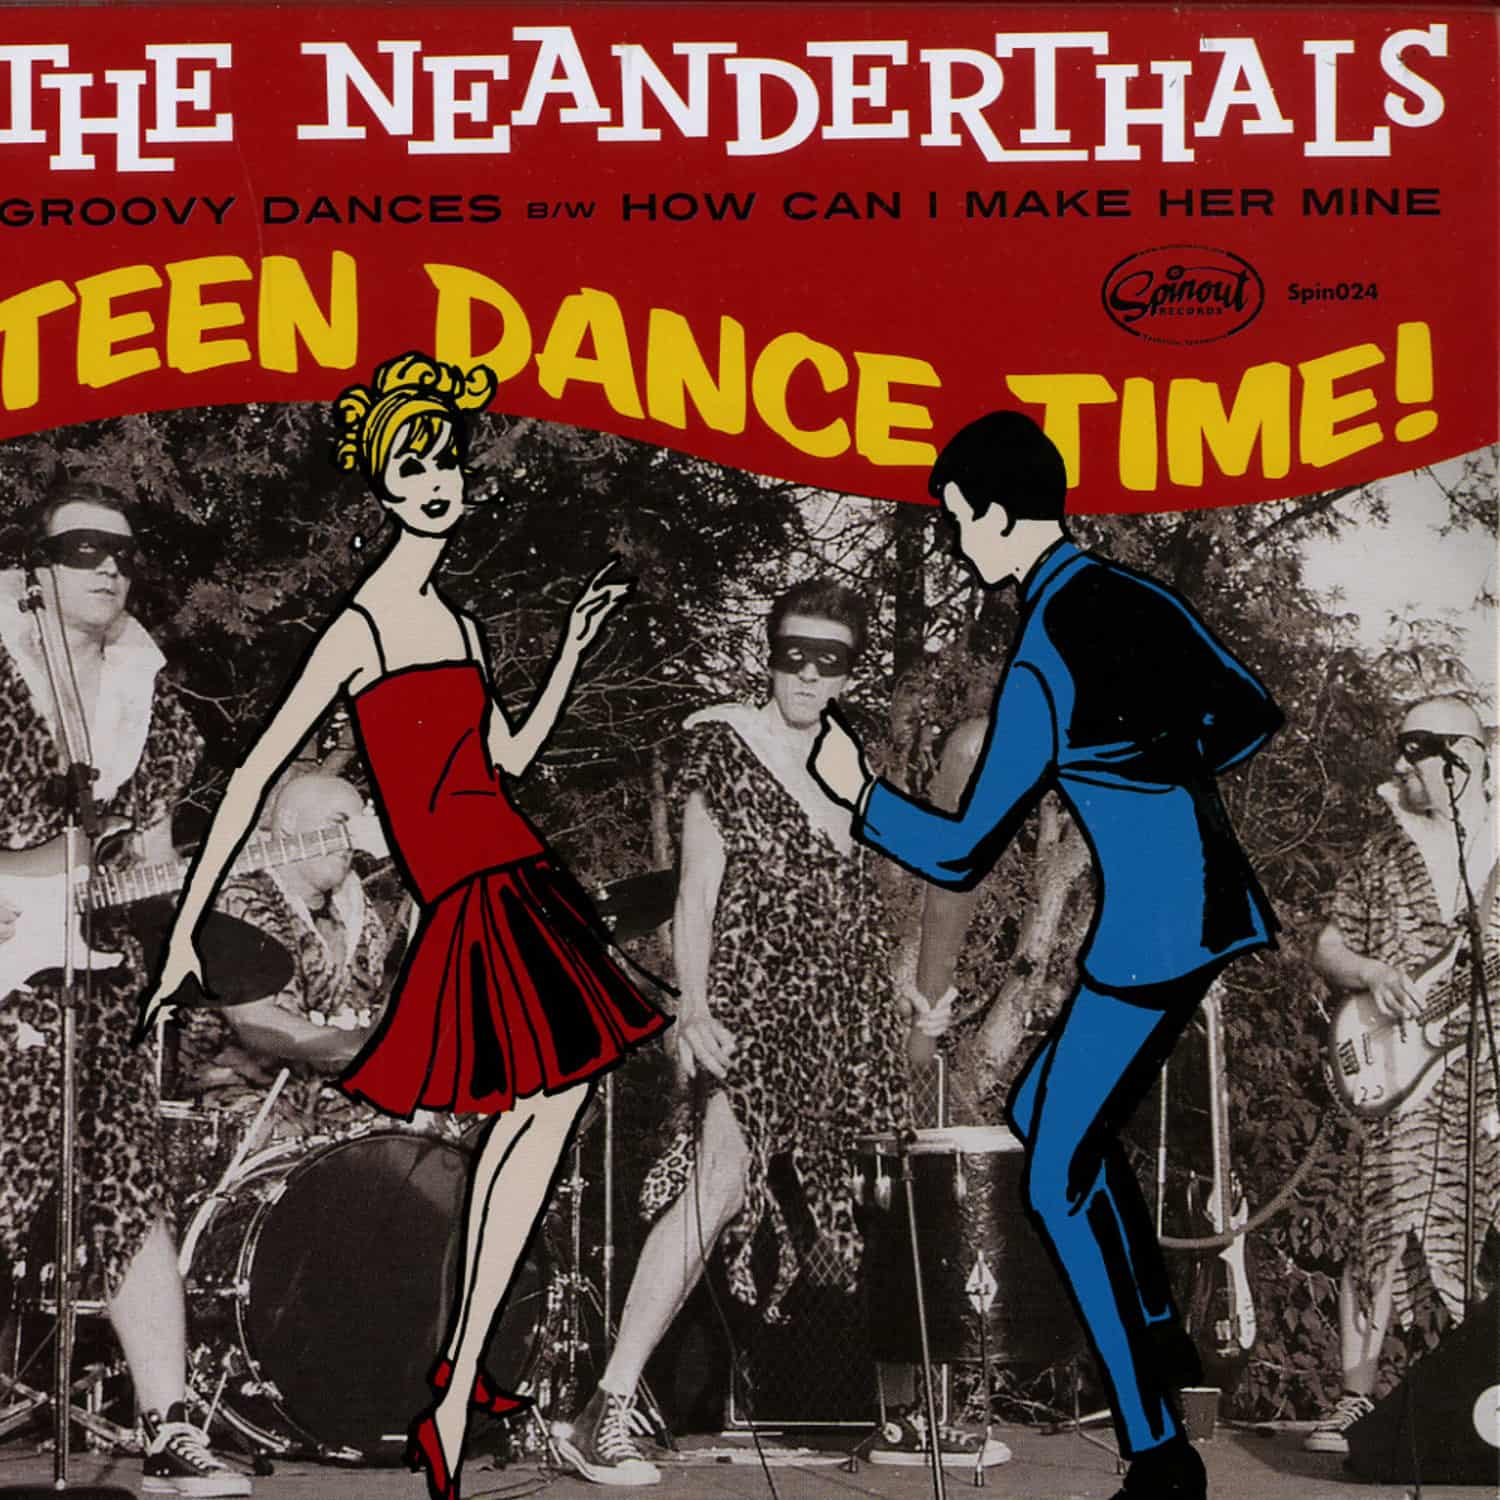 The Neanderthals - GROOVY DANCES / HOW CAN I MAKE HER MINE 